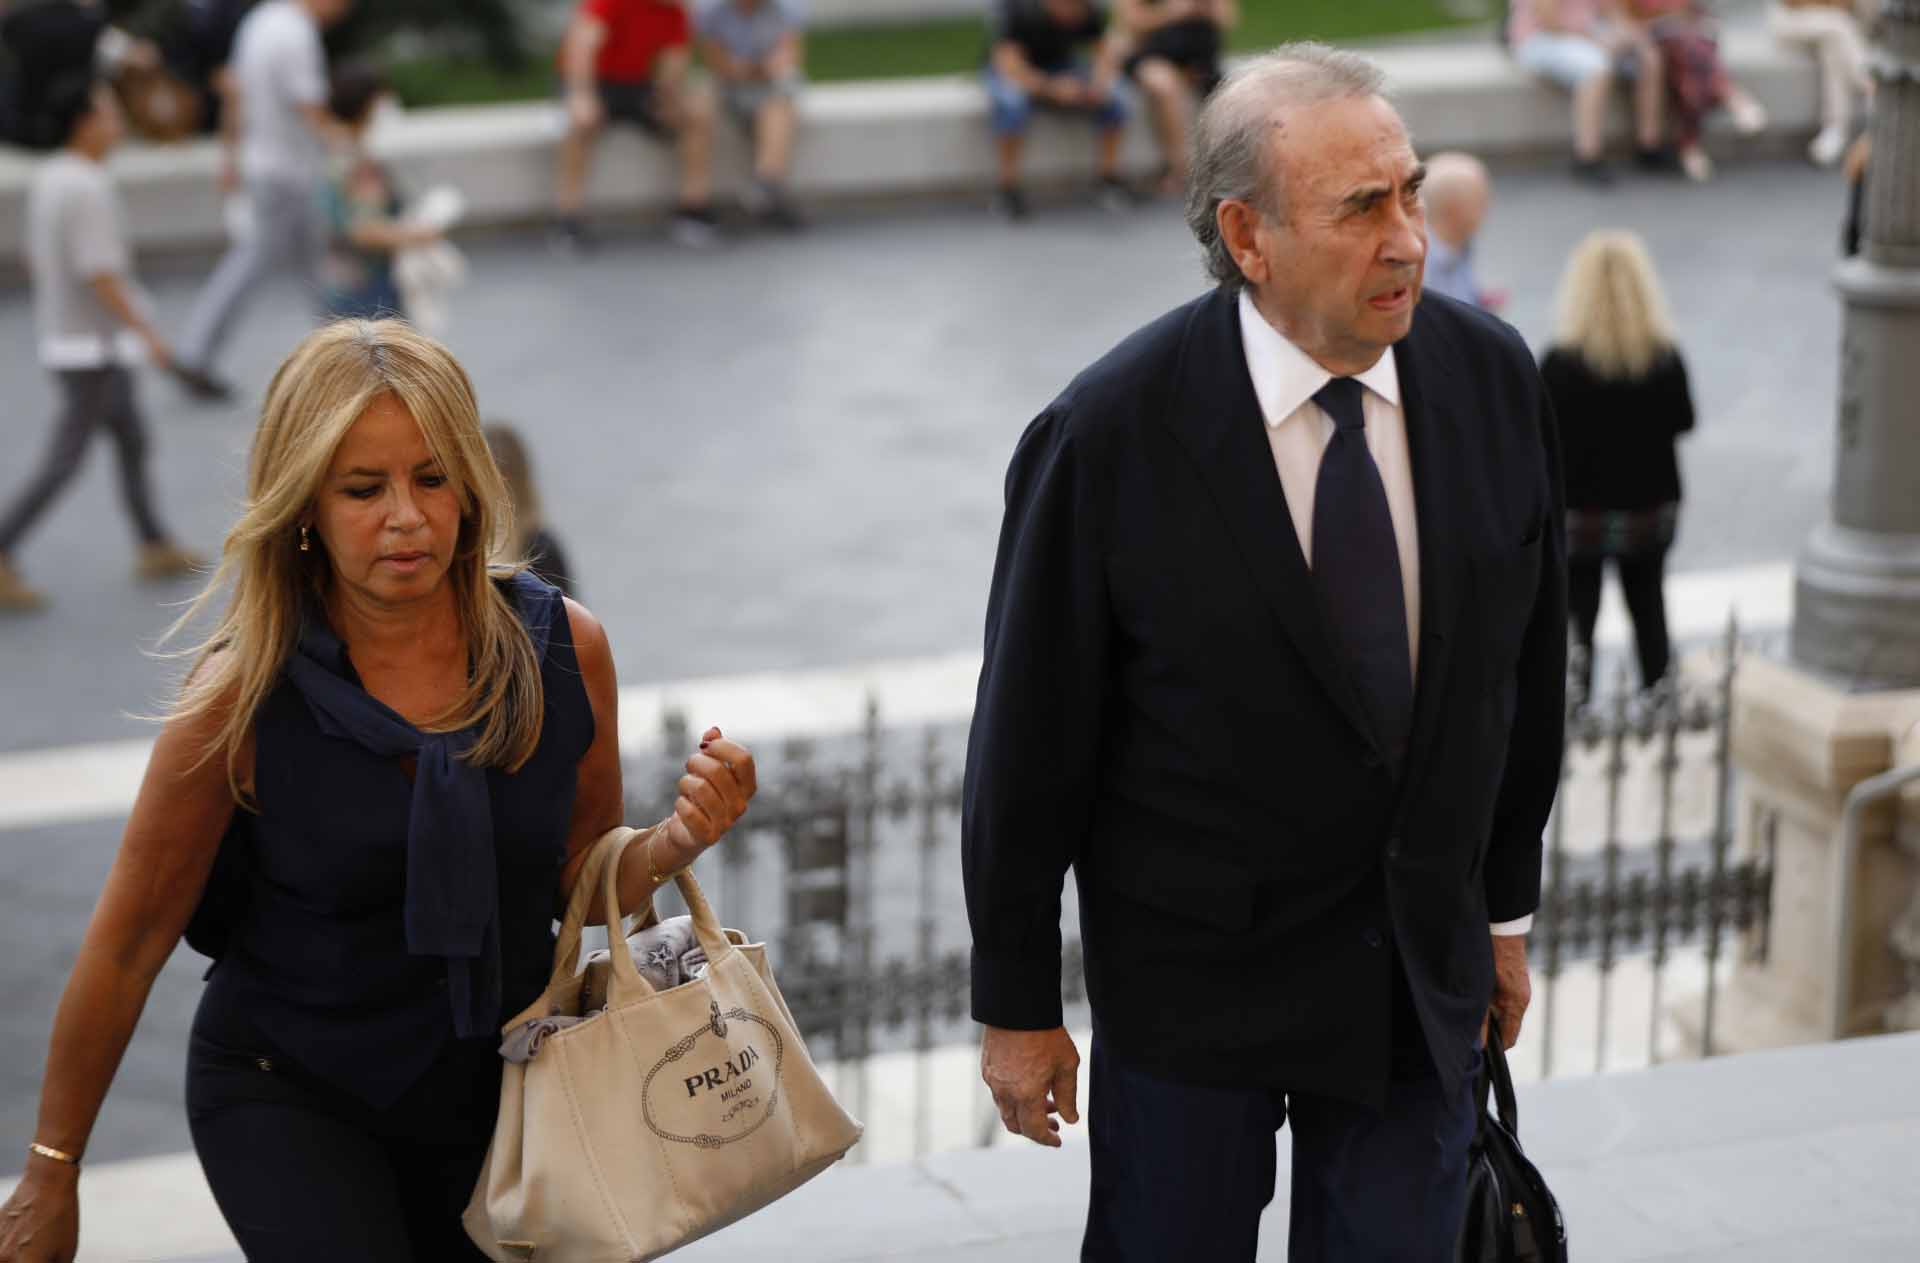 Pedro Trapote and BegoÃ±a Garcia Vaquero during funeral of Ramses Trujillo in Madrid on Thursday, 22 September 2022.